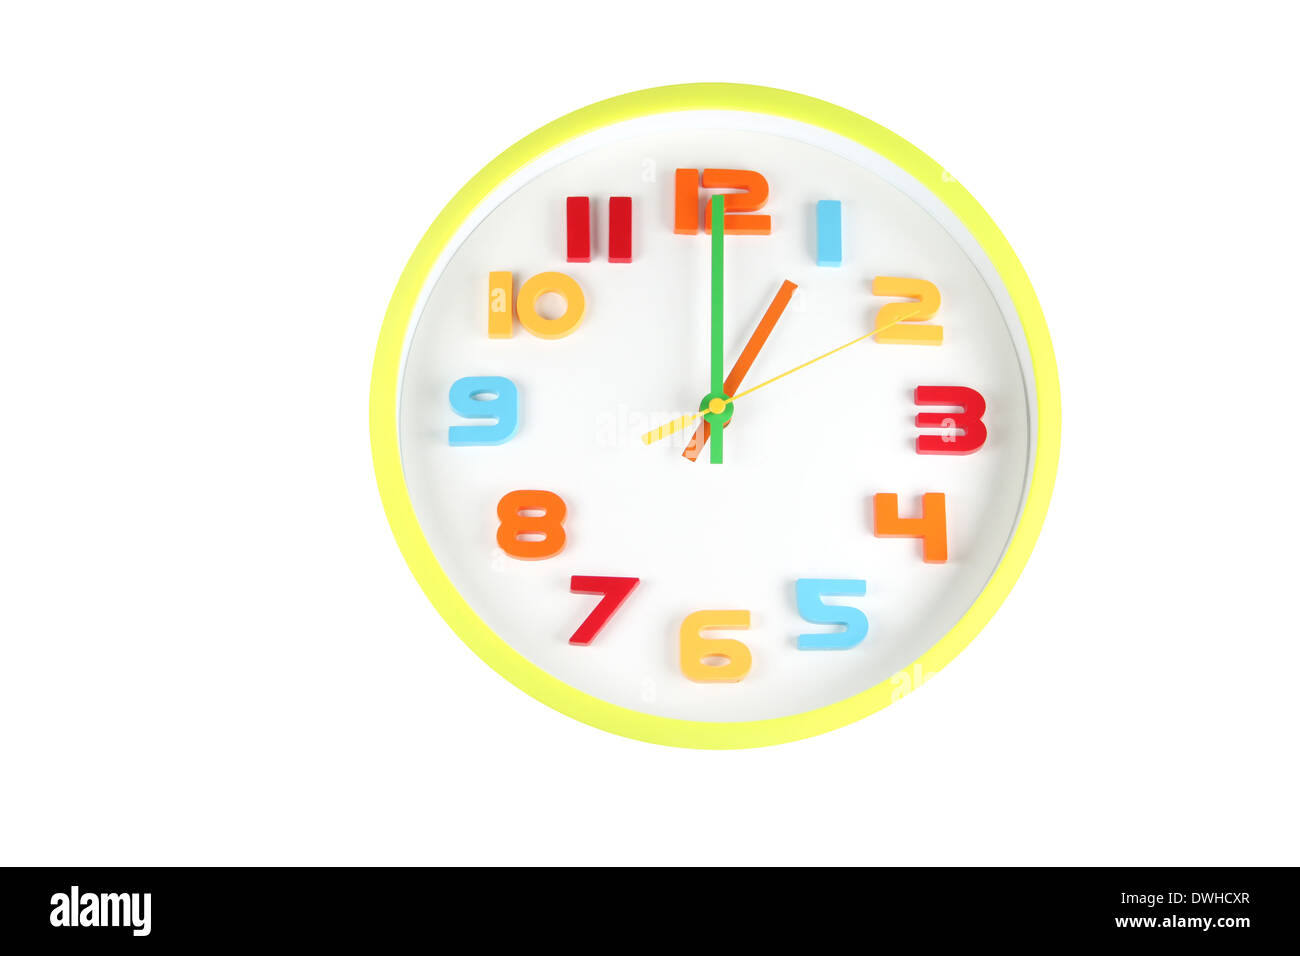 Colorful clock in telling time of one o'clock on white background. Stock Photo